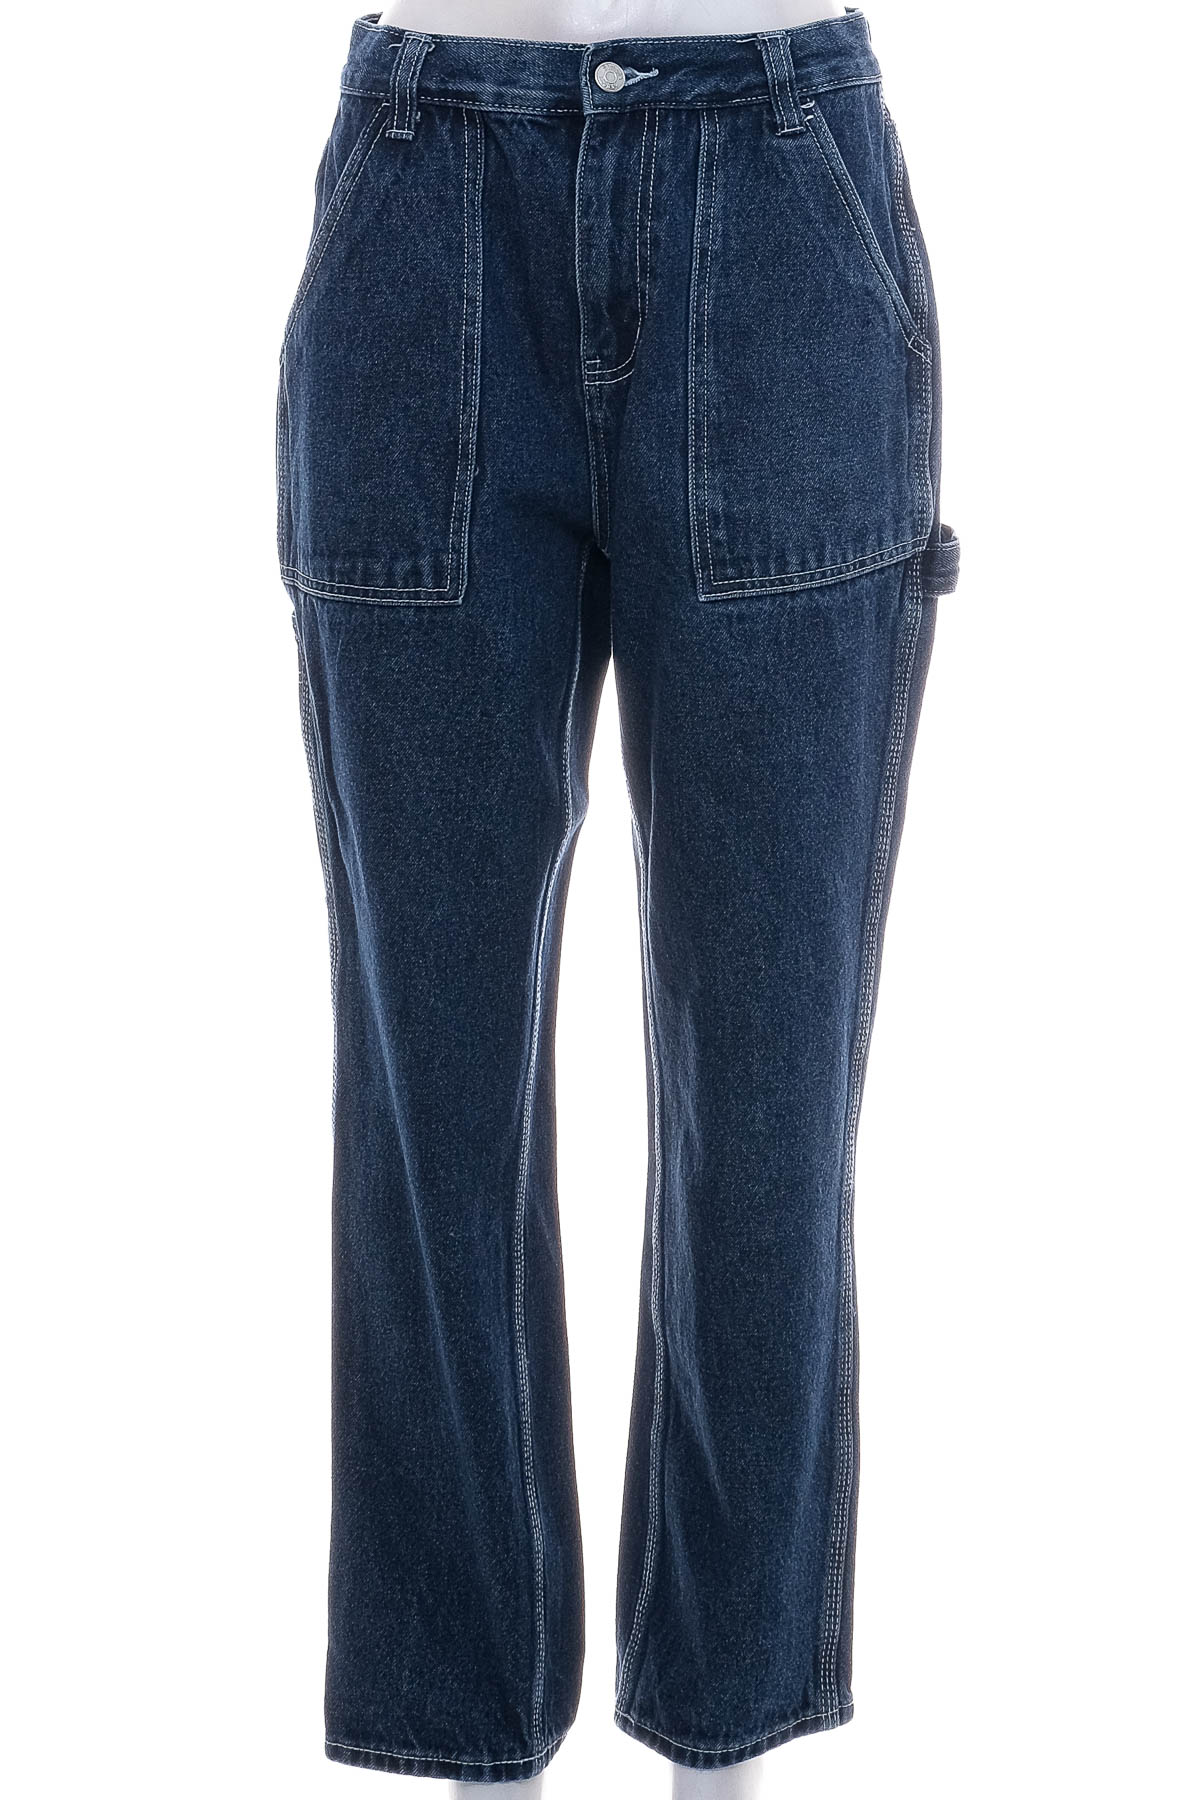 Women's jeans - Simple Society - 0